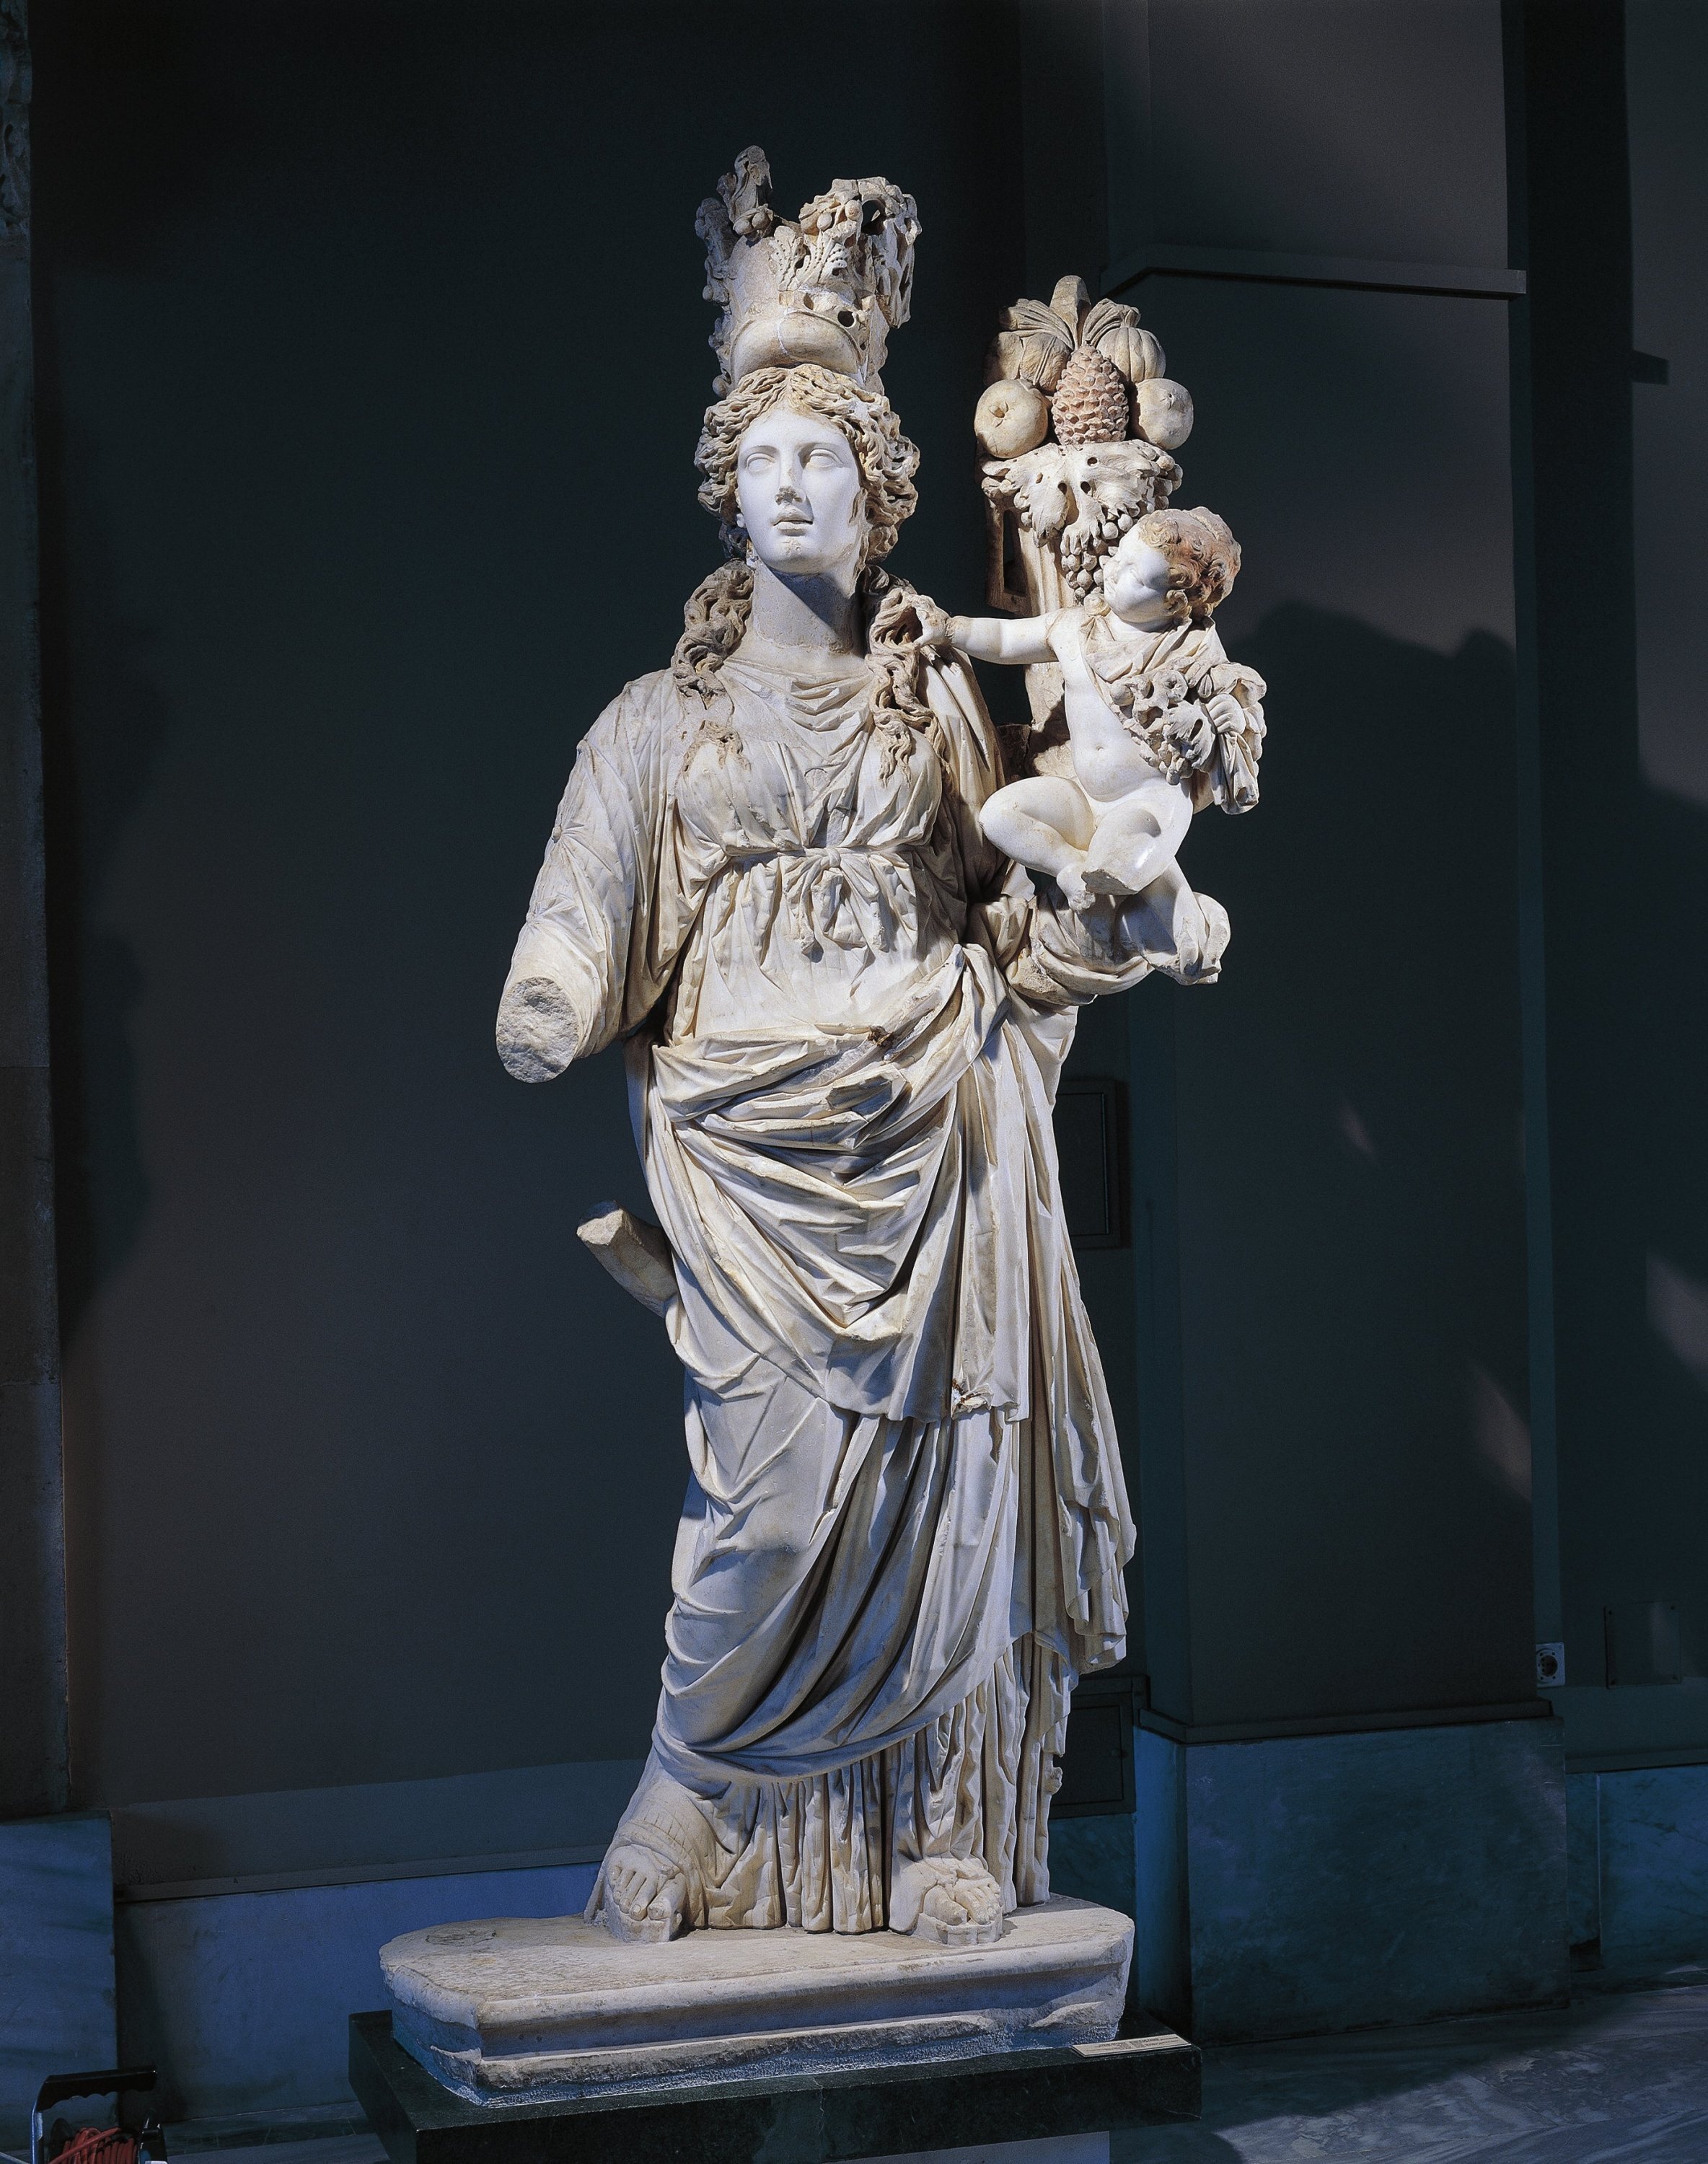 The marble statue of Tyche from Prusias ad Hypium in the Istanbul Archaeology Museum, Istanbul, Turkey. (Getty Images)